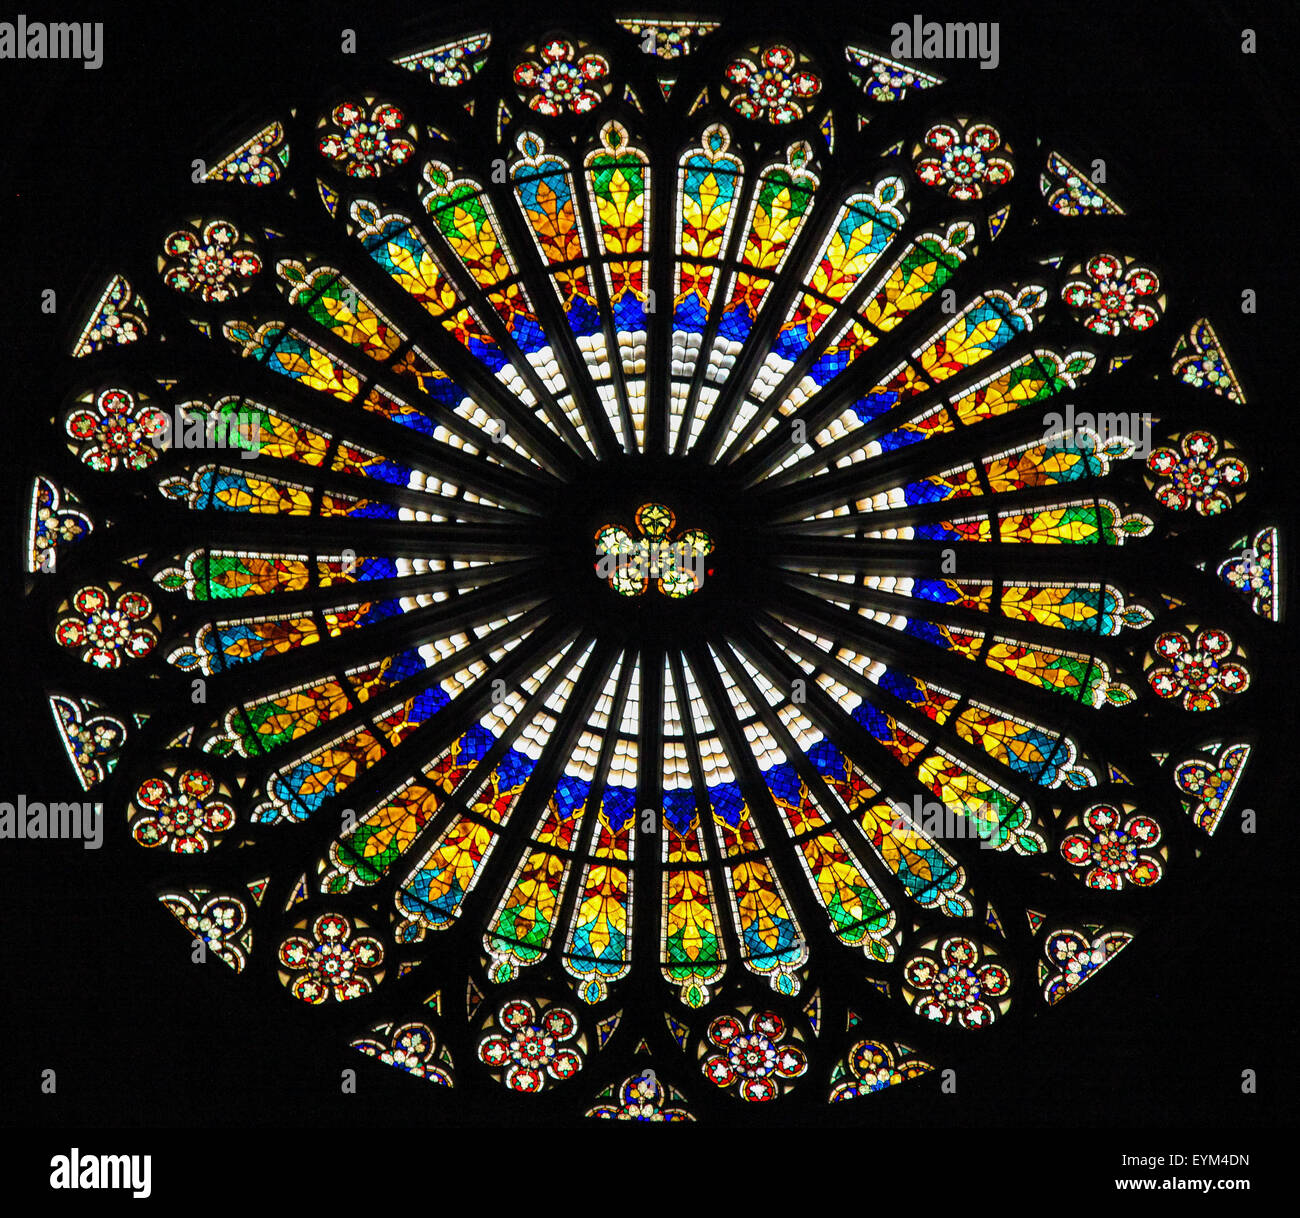 STRASBOURG, FRANCE - MAY 9, 2015: Rose window in the Notre Dame cathedral of Strasbourg, France Stock Photo